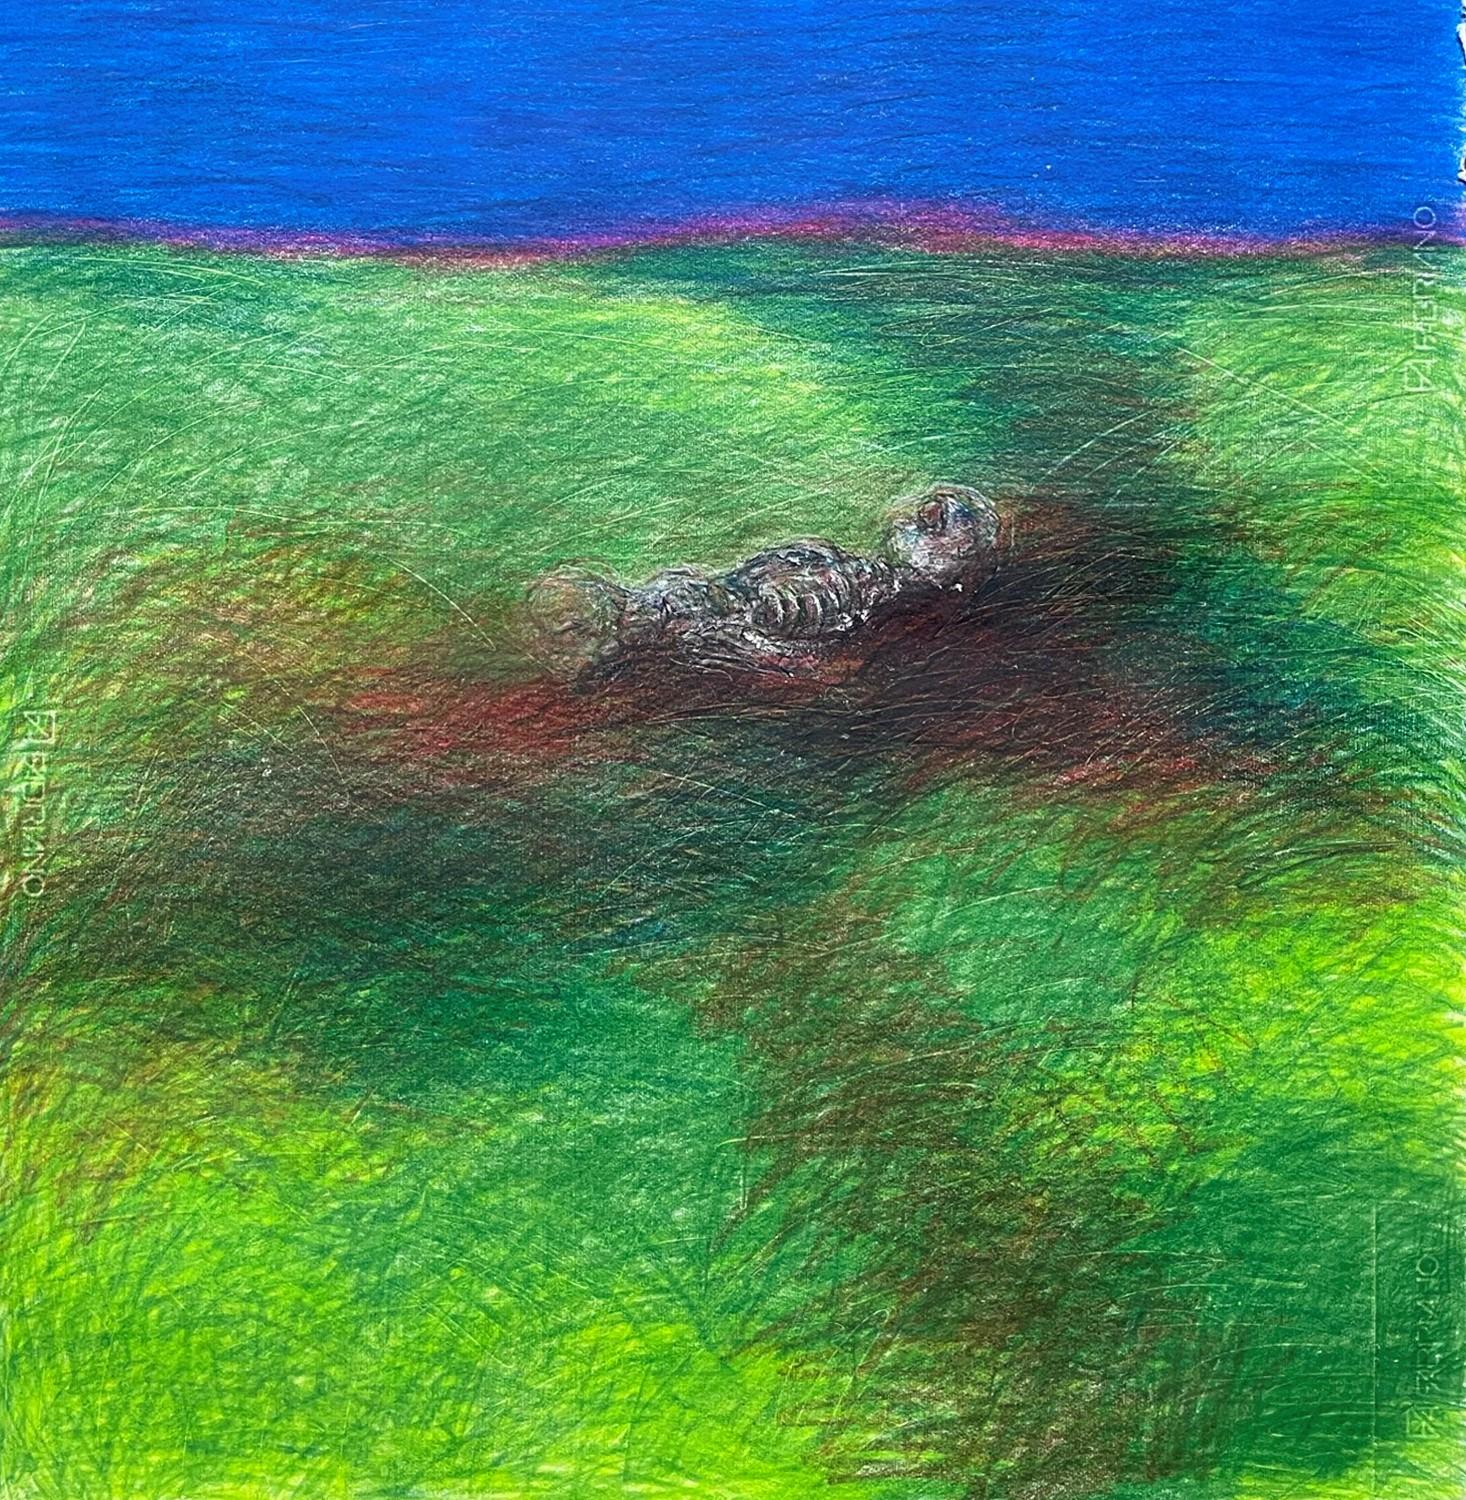 Untitled_Body on the Field #1, 2022
coloured pencils on paper
39 3/8 H x 27 9/16 W inches
100 H x 70 W cm
Signed on reverse

Zsolt Berszán embodies in his works the dissolution of the human body through the prism of the fragment, the body in pieces,